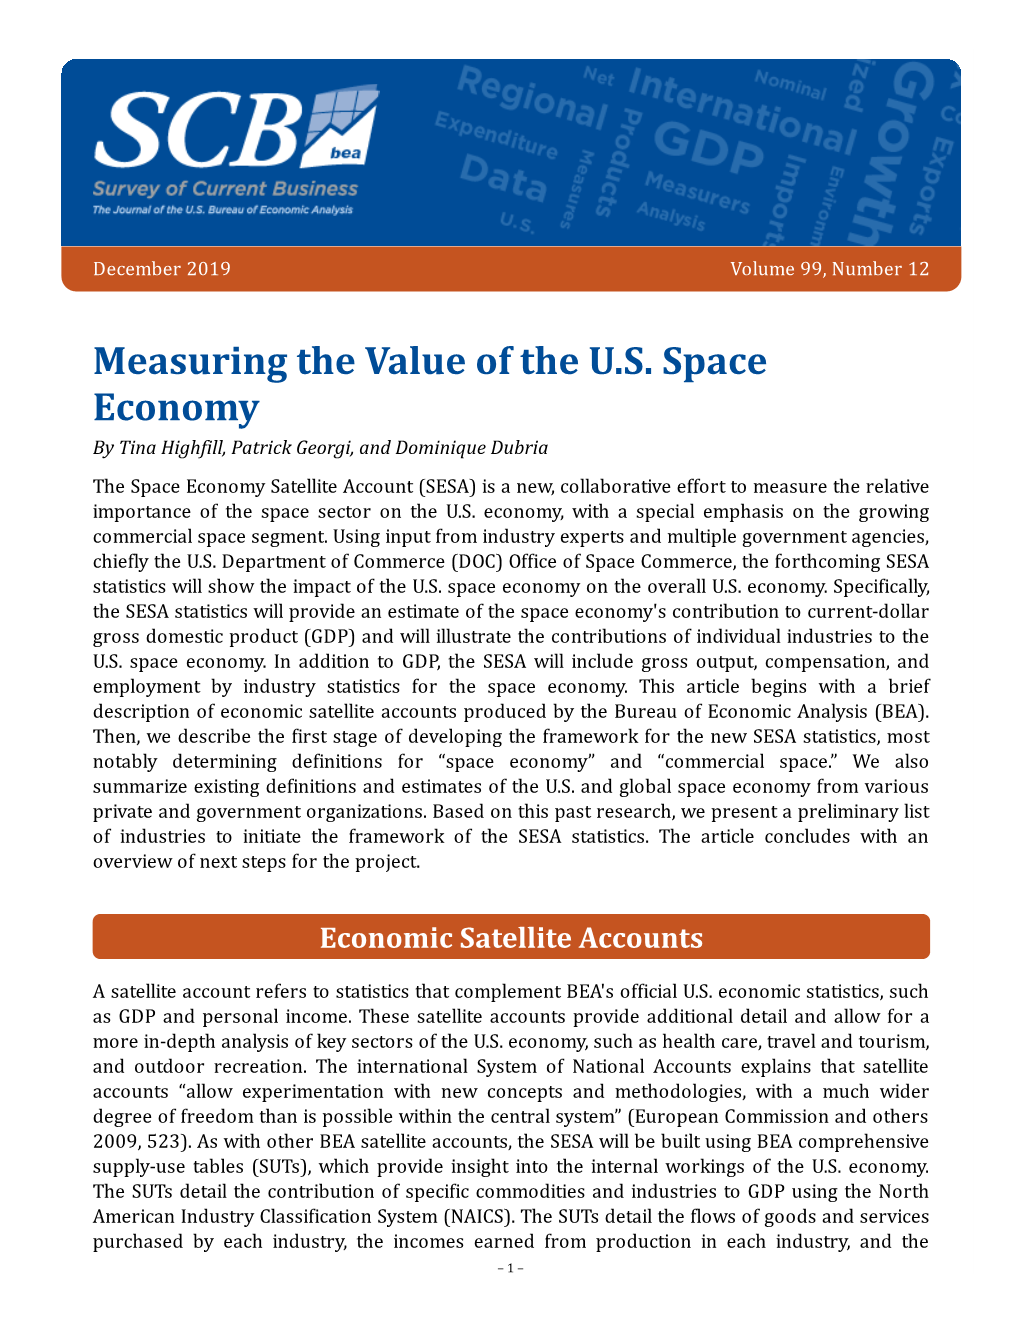 Measuring the Value of the U.S. Space Economy